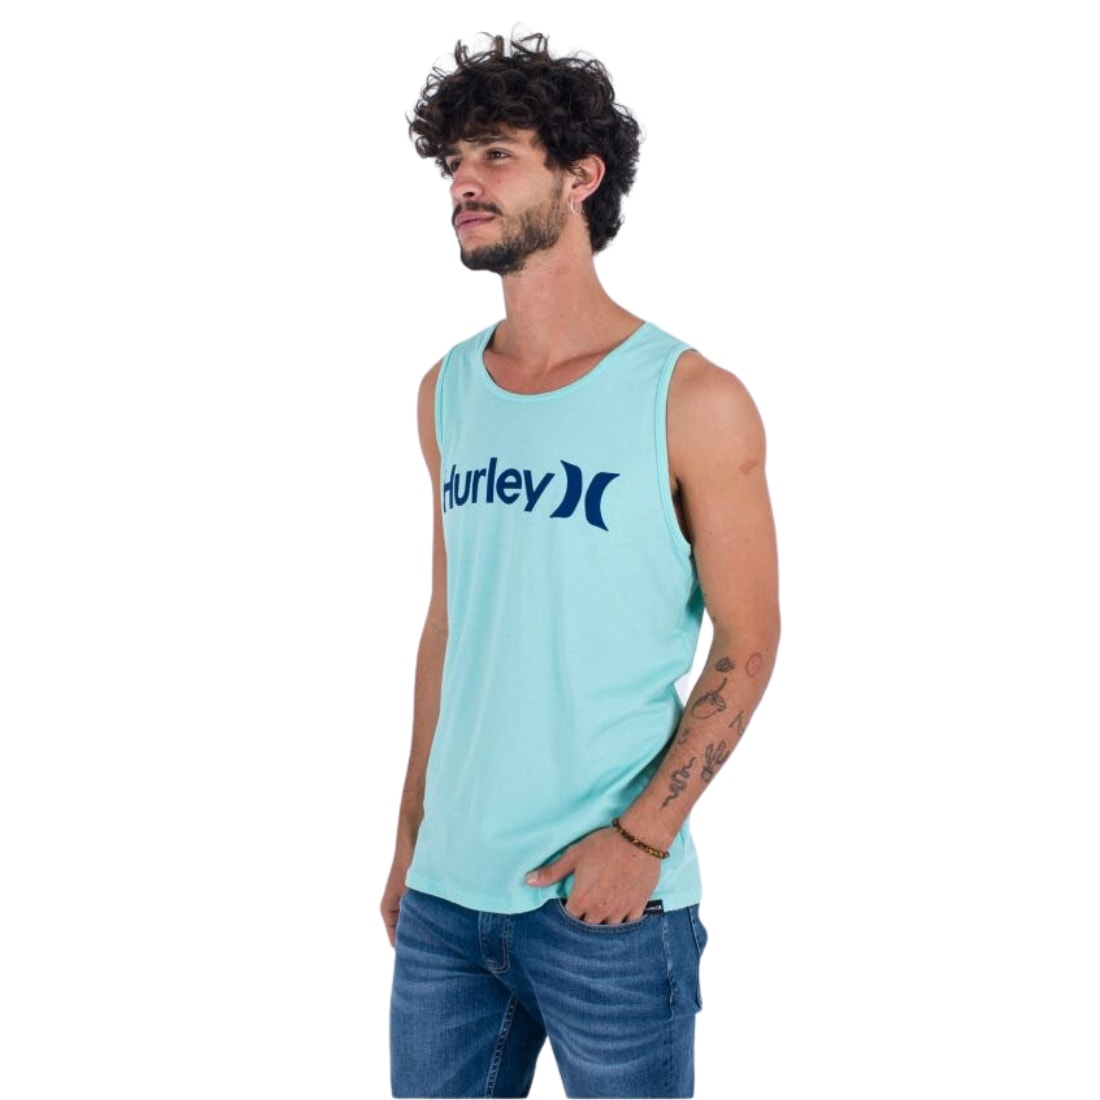 Hurley Everyday One & Only Solid Tank Top Vest - Tropical Mist Heather - Mens Surf Brand Vest/Tank Top by Hurley